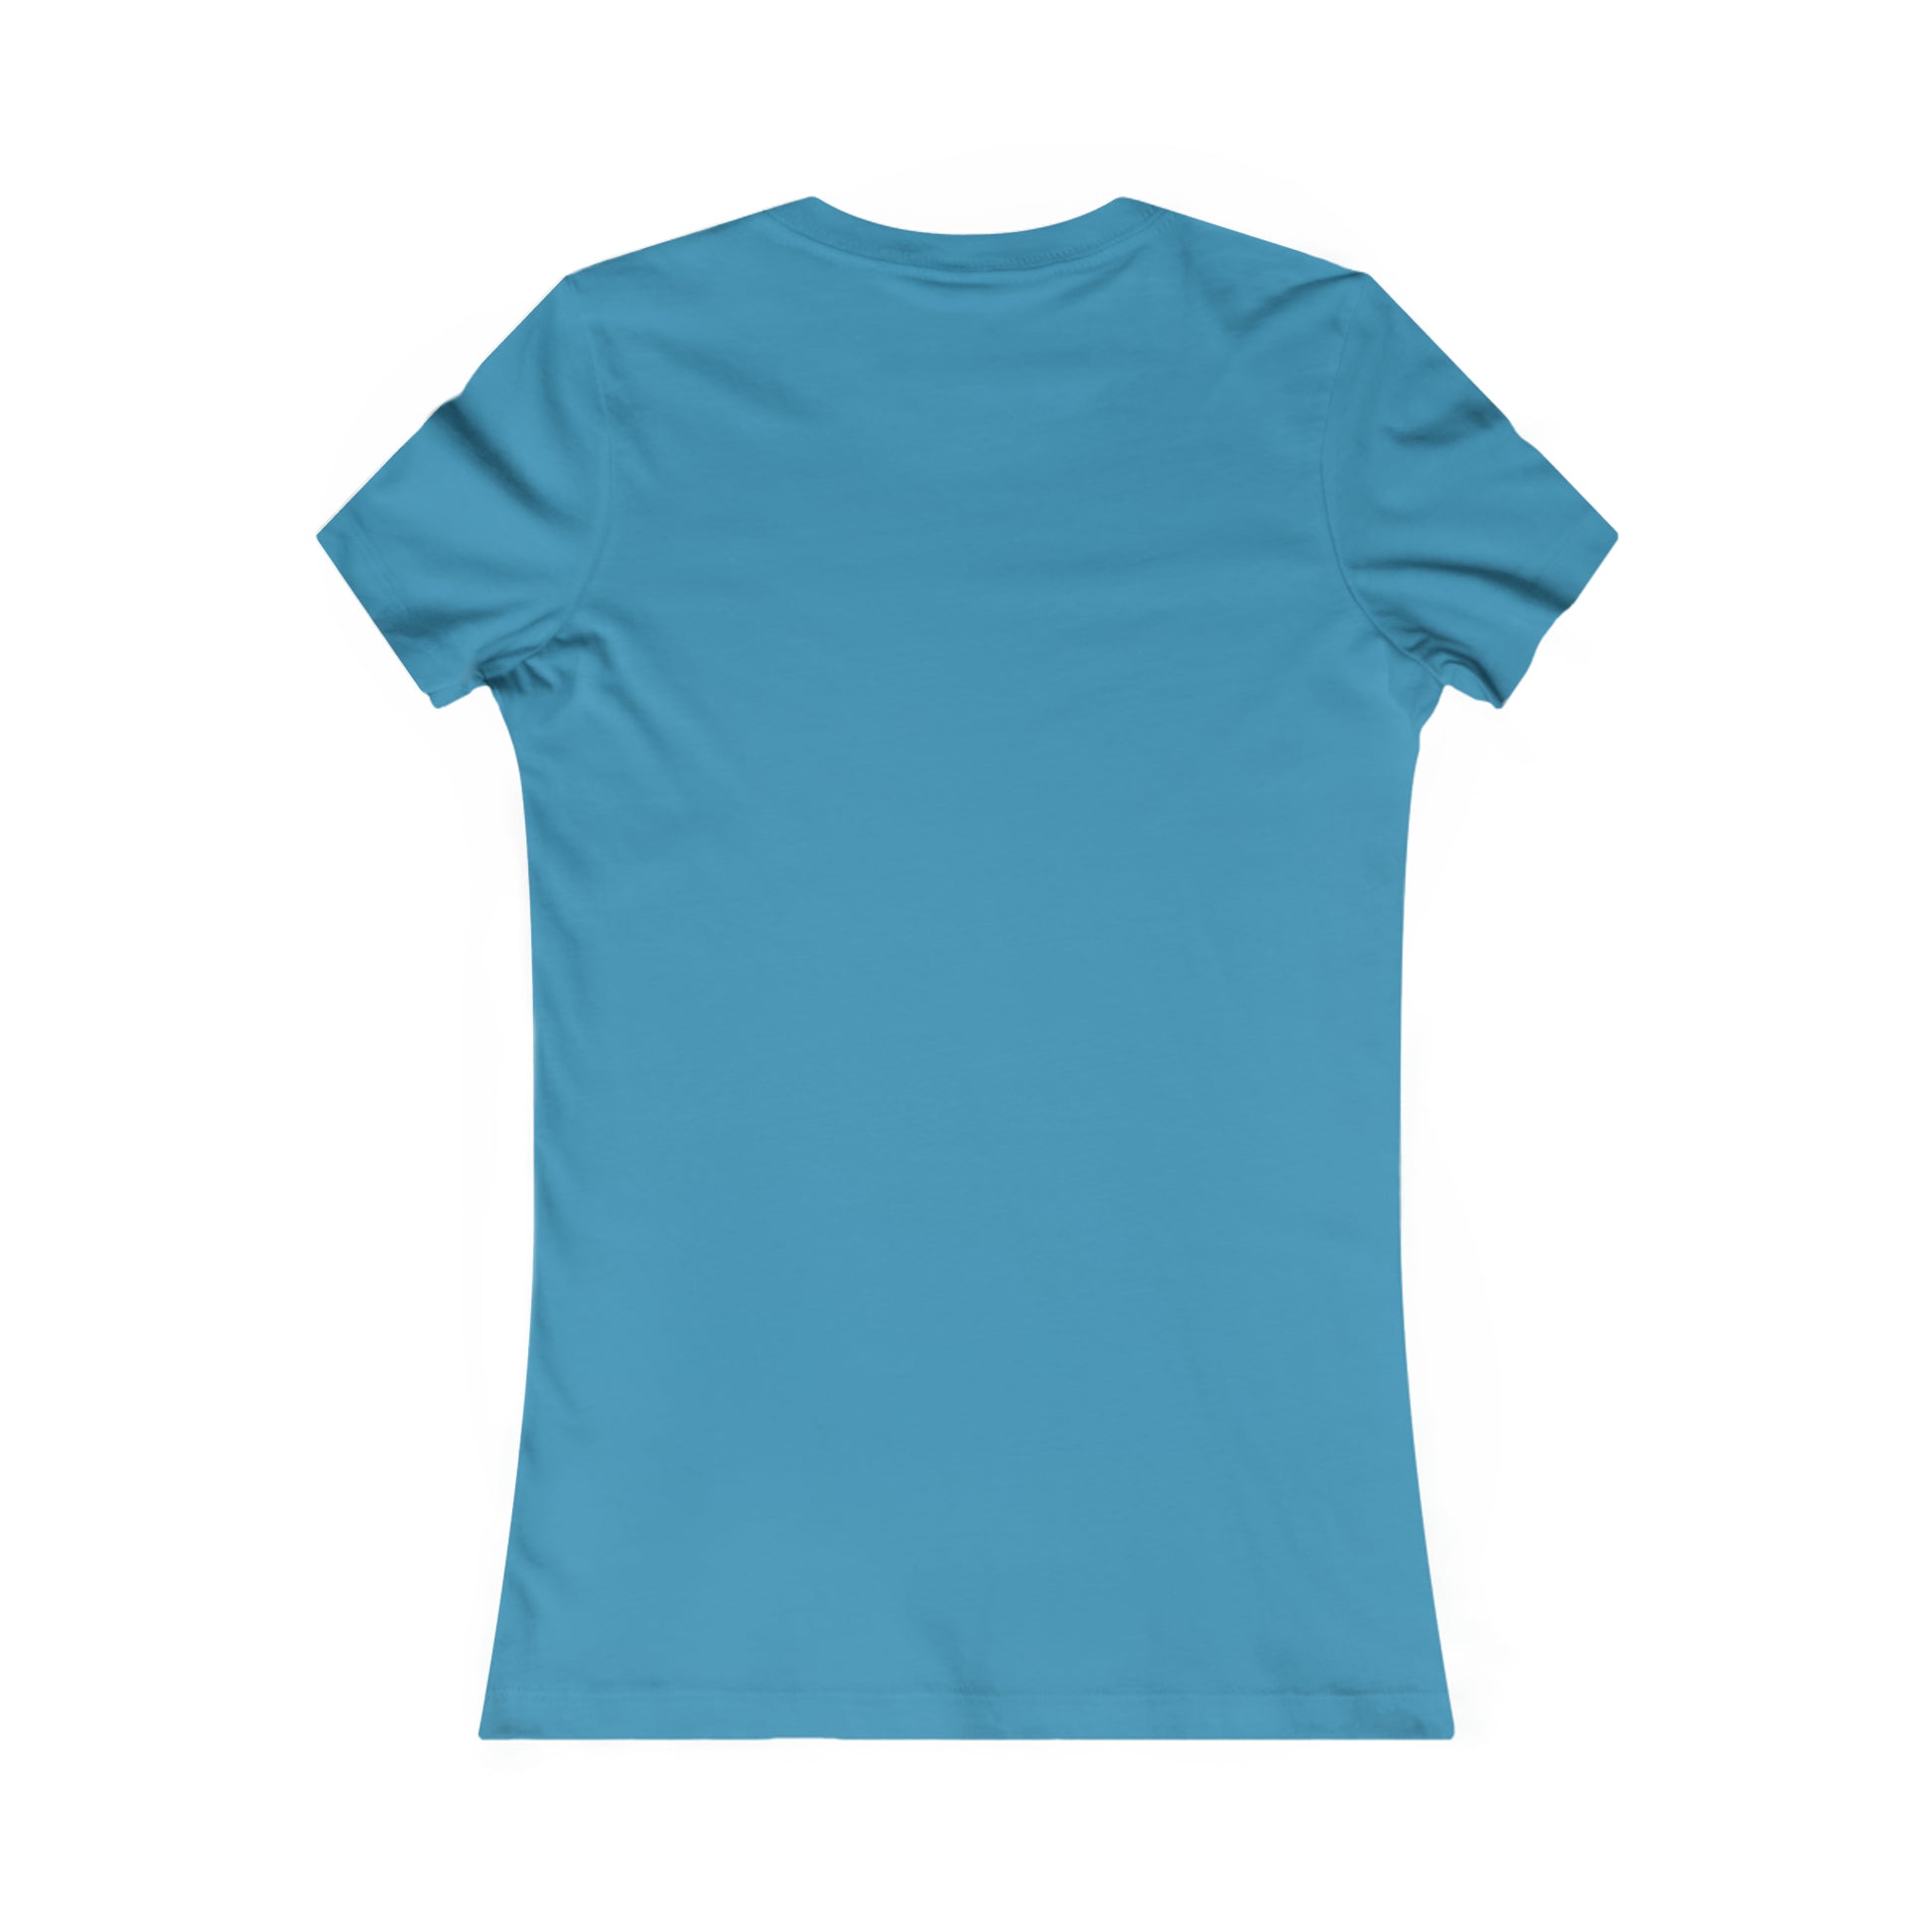 B.O.S.S - Believing Over Stressing Soft Blend Women's Tee Printify